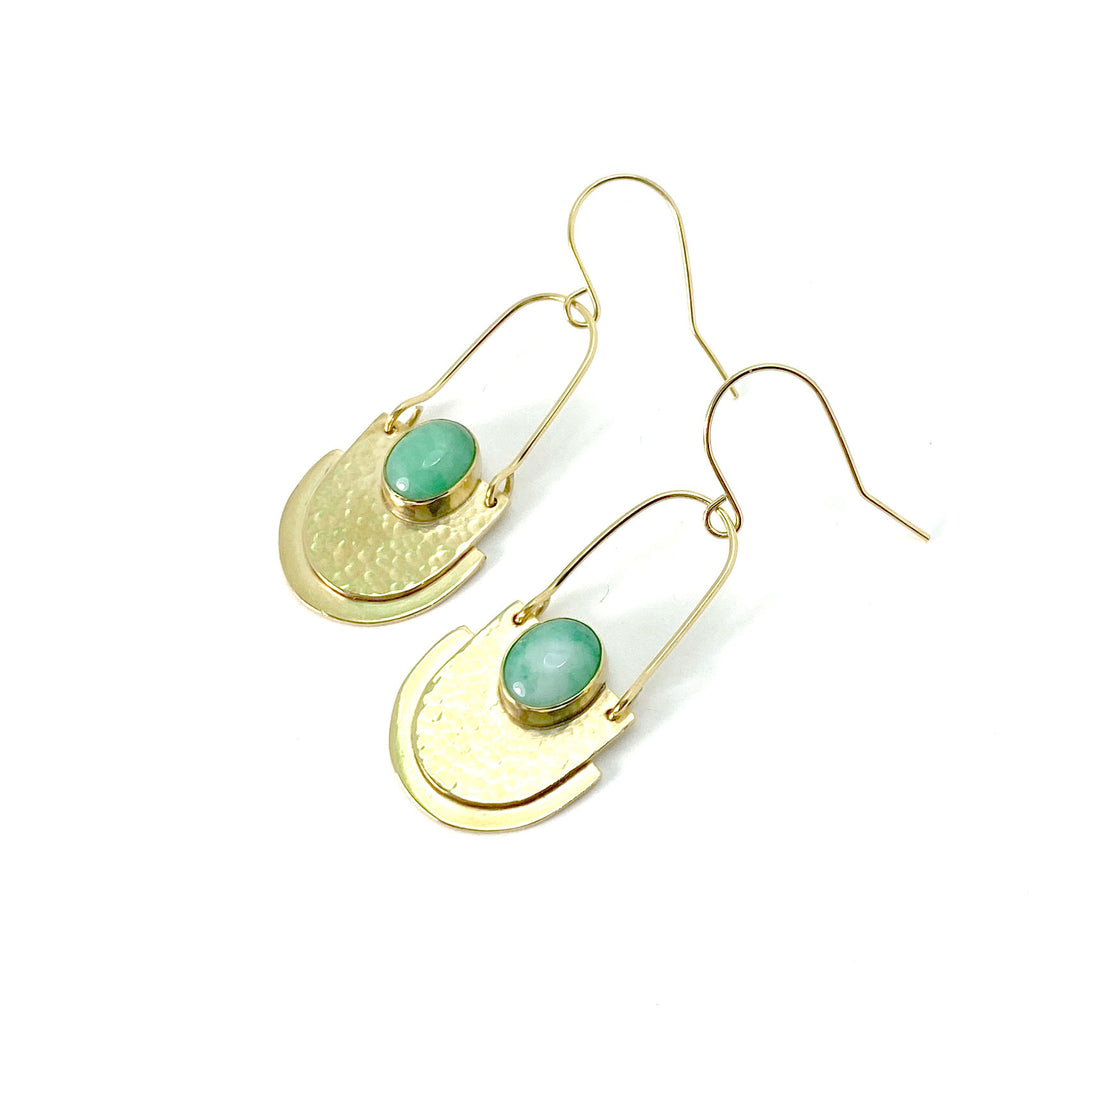 Gold colour brass earrings with a tiered, u-shaped pendant hanging from a wire loop with wire ear hooks. Centered on the pendant is a light-green oval stone.